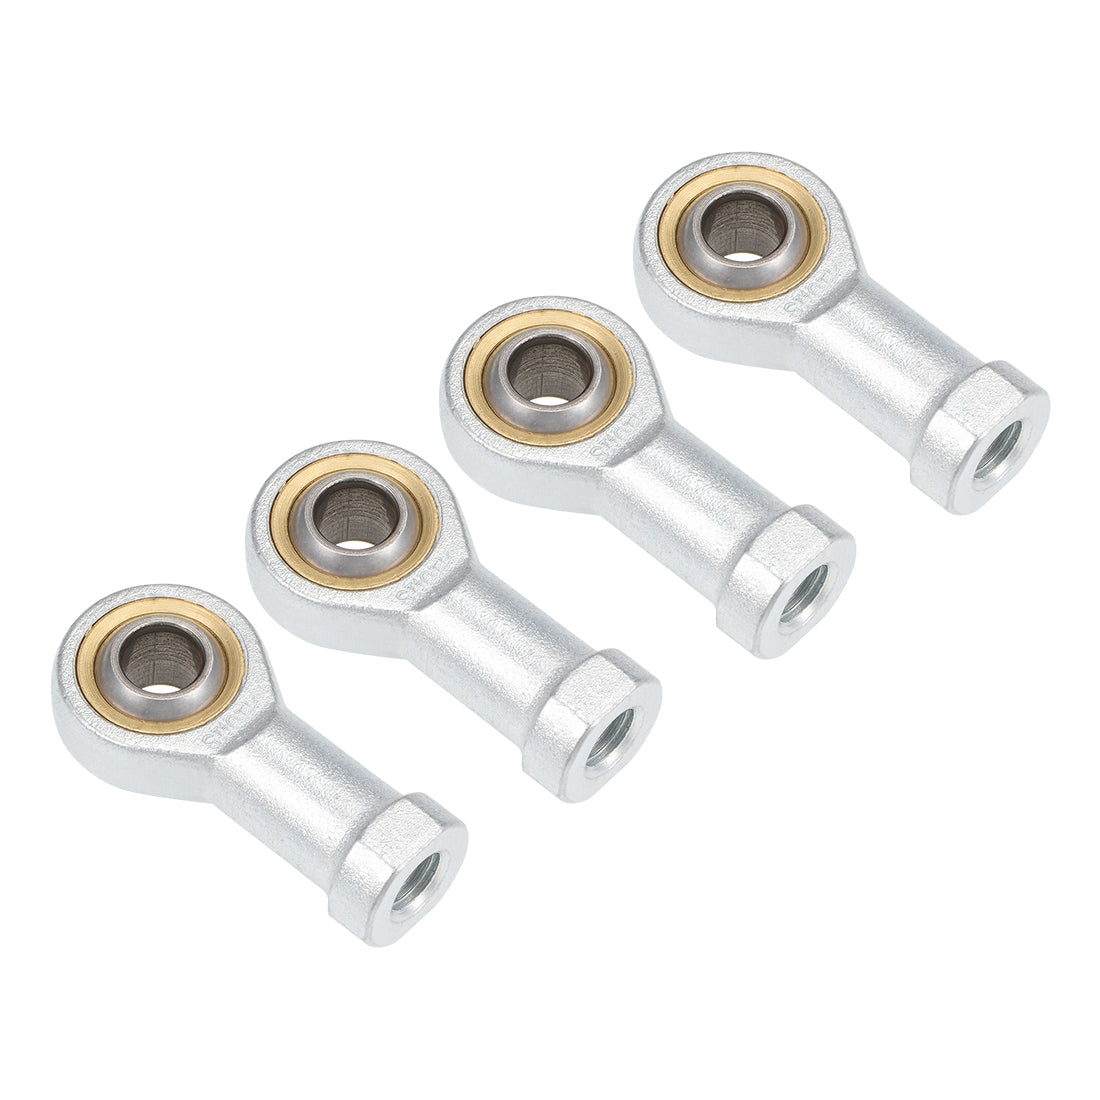 uxcell Uxcell 10mm Rod End Bearing M10x1.5mm Rod Ends Ball Joint Female Right Hand Thread 4pcs